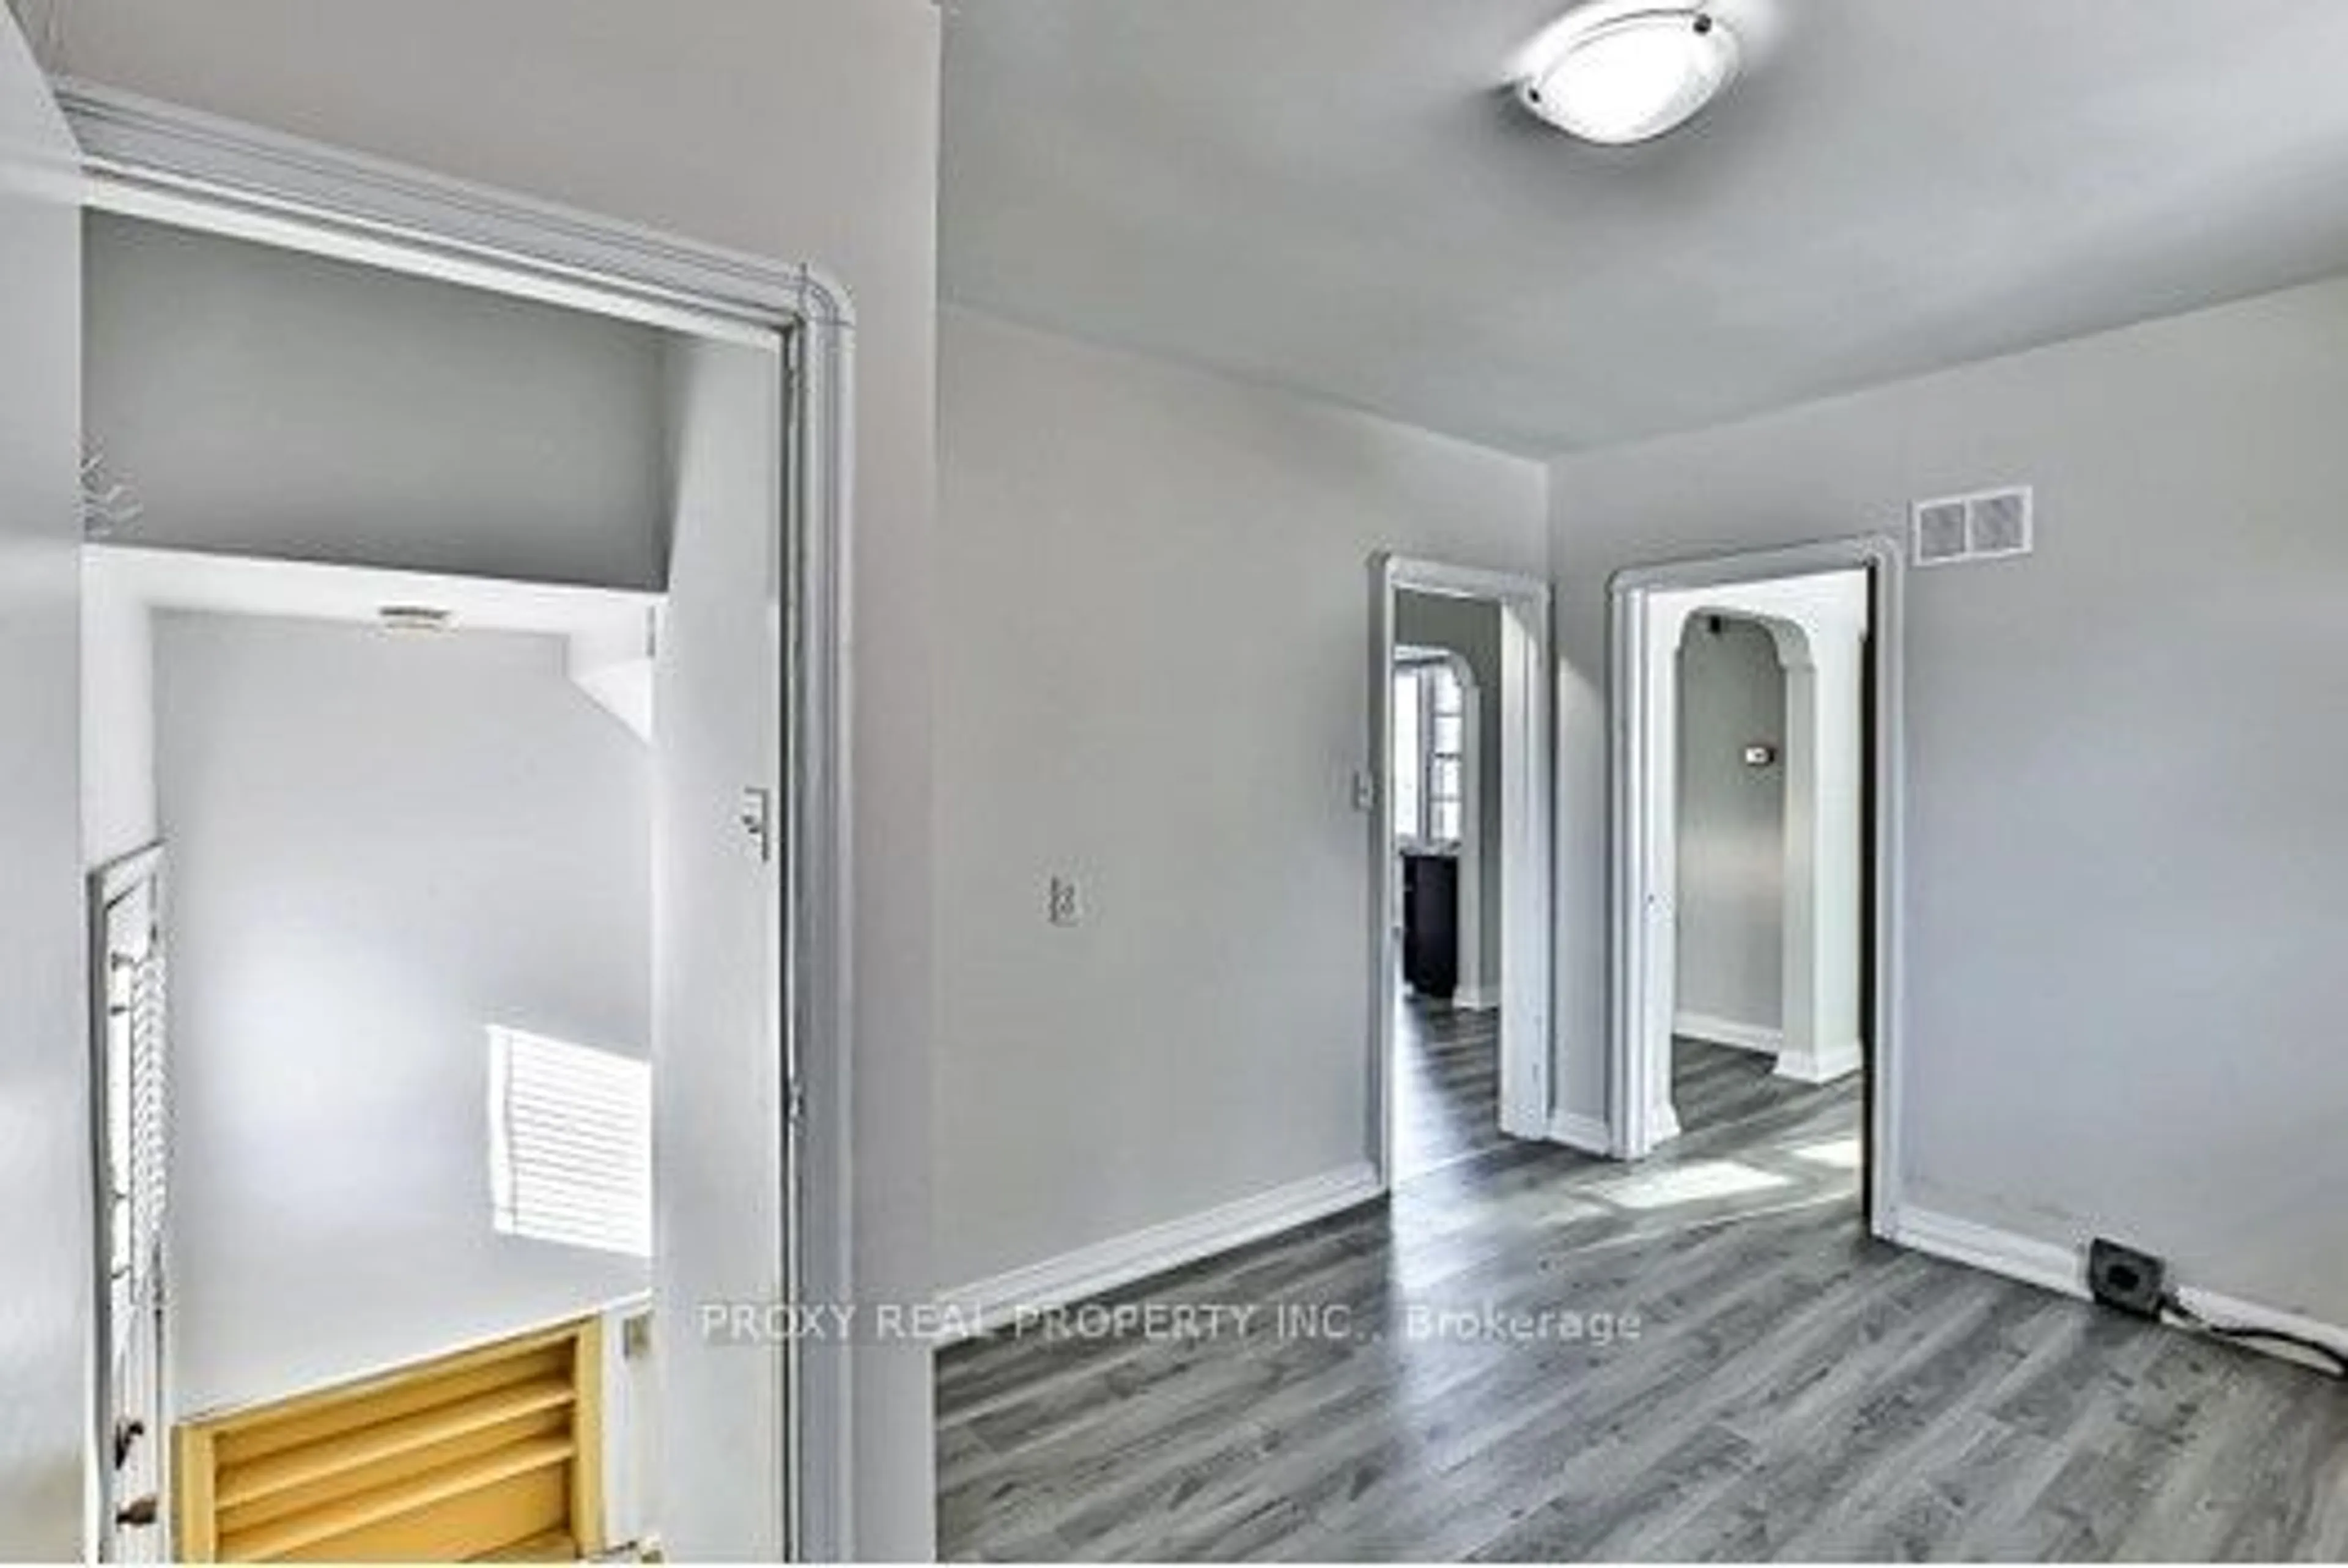 Indoor entryway for 313 Sheppard Ave, Toronto Ontario M2N 3B3